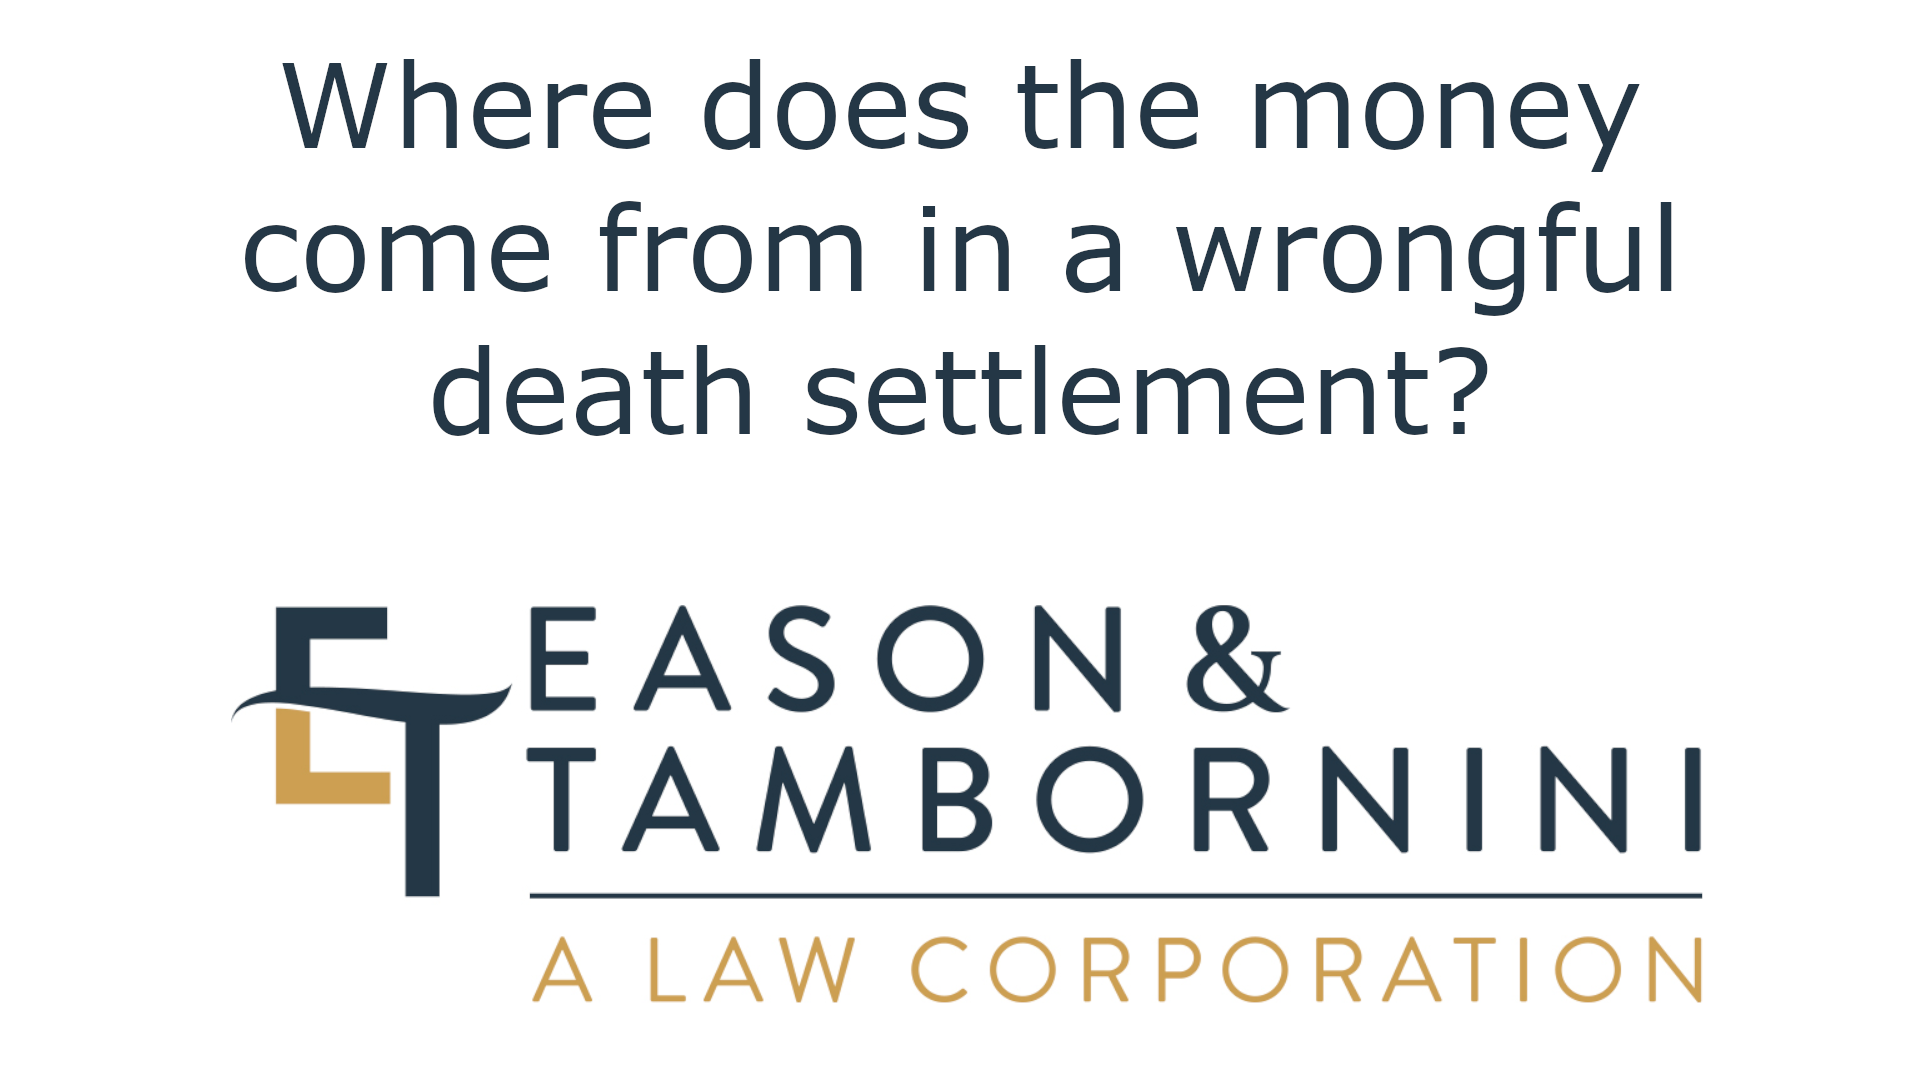 Where does the money come from in a wrongful death lawsuit?